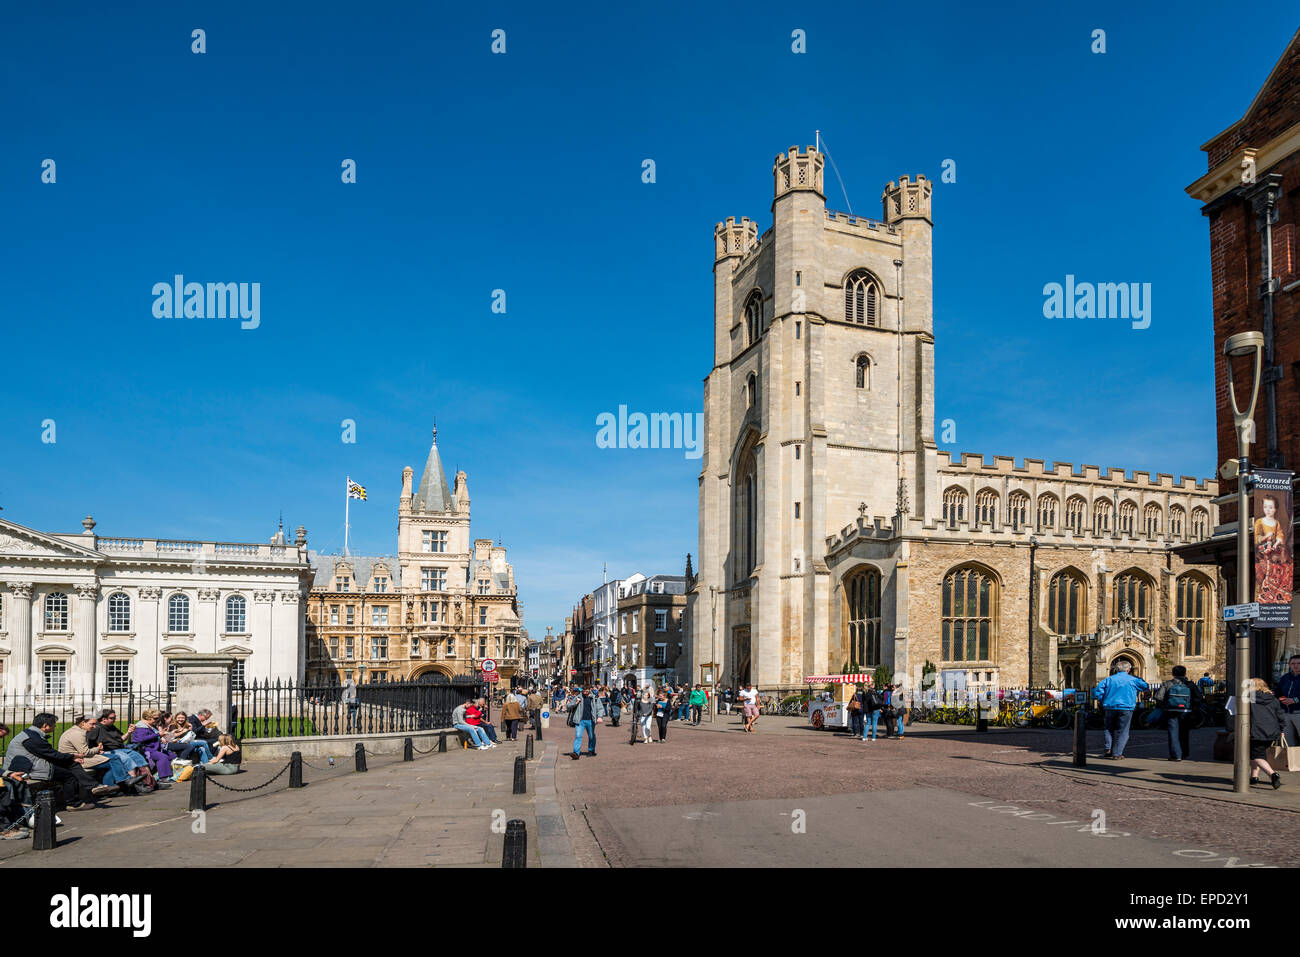 Great St Mary's Church, also Church of St Mary the Great is the University church of Cambridge and is located in the town centre Stock Photo